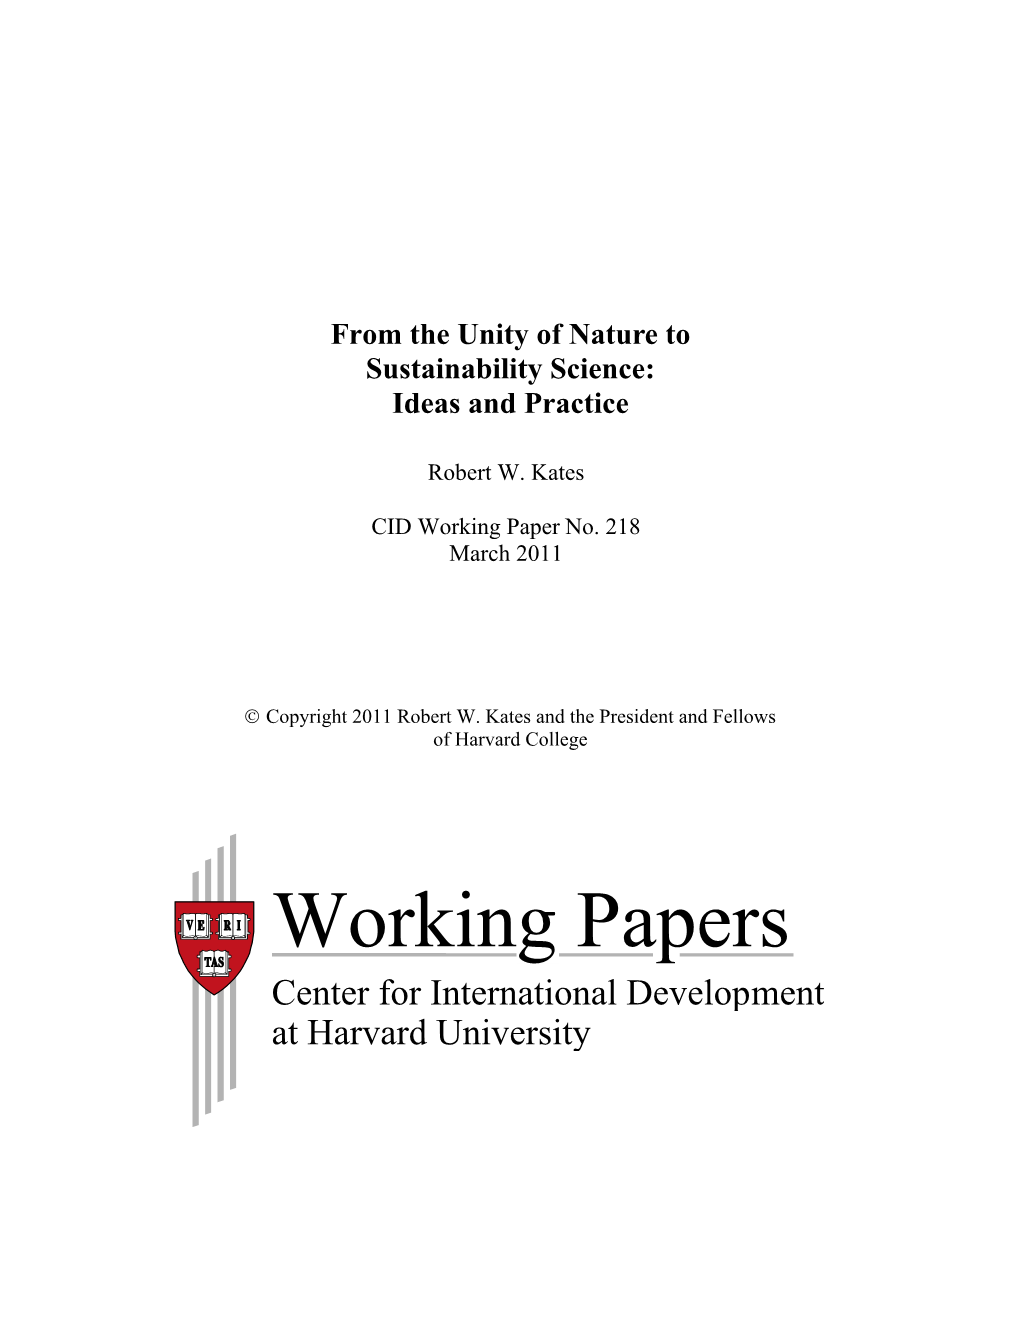 Working Papers Center for International Development at Harvard University from the Unity of Nature to Sustainability Science: Ideas and Practice